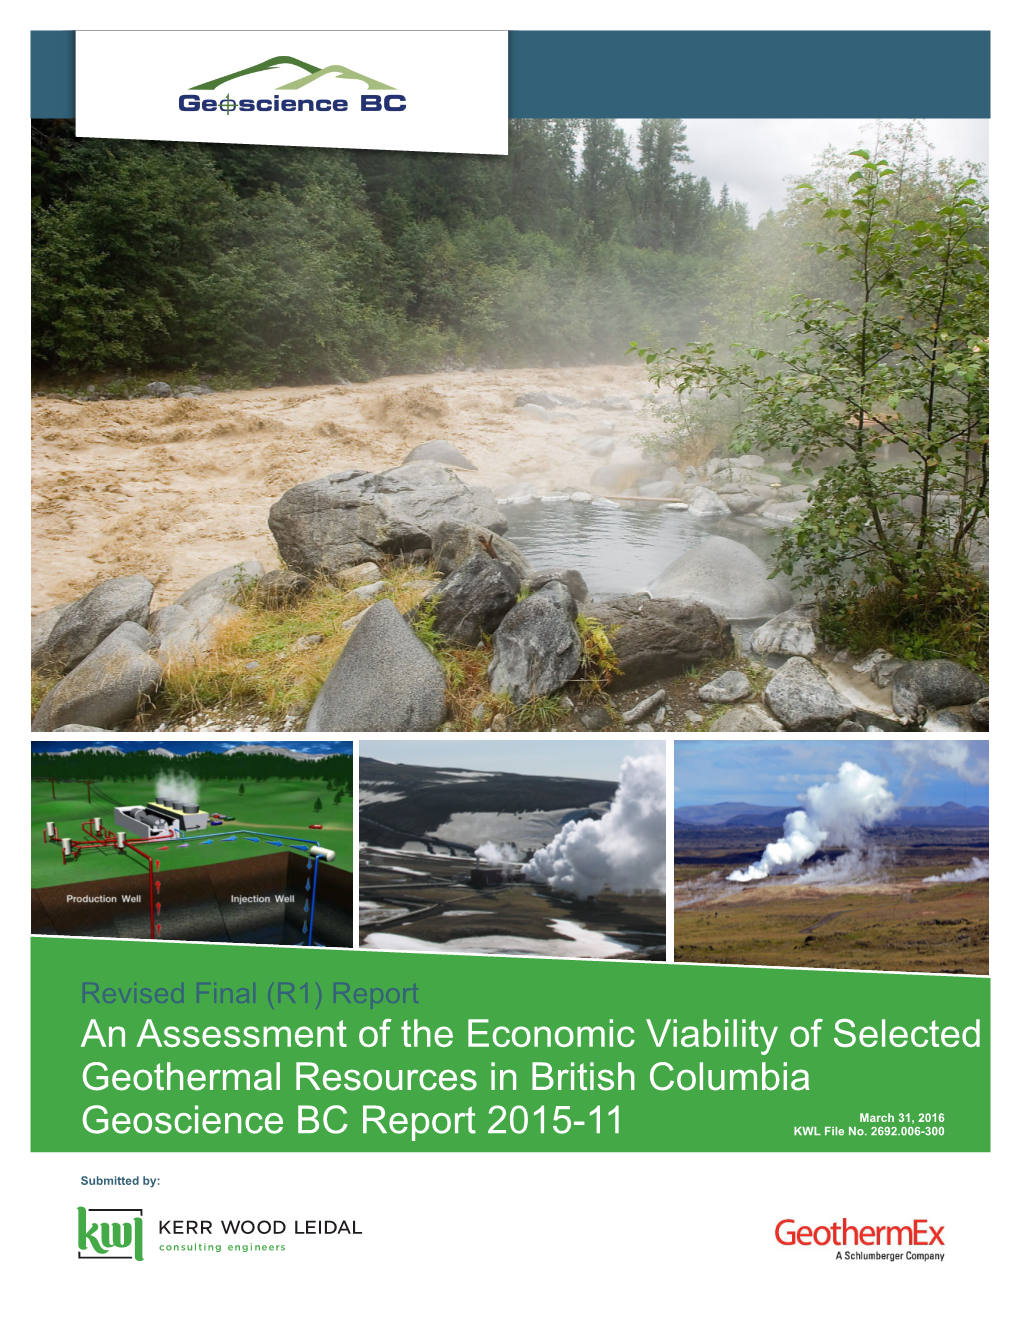 An Assessment of the Economic Viability of Selected Geothermal Resources in British Columbia